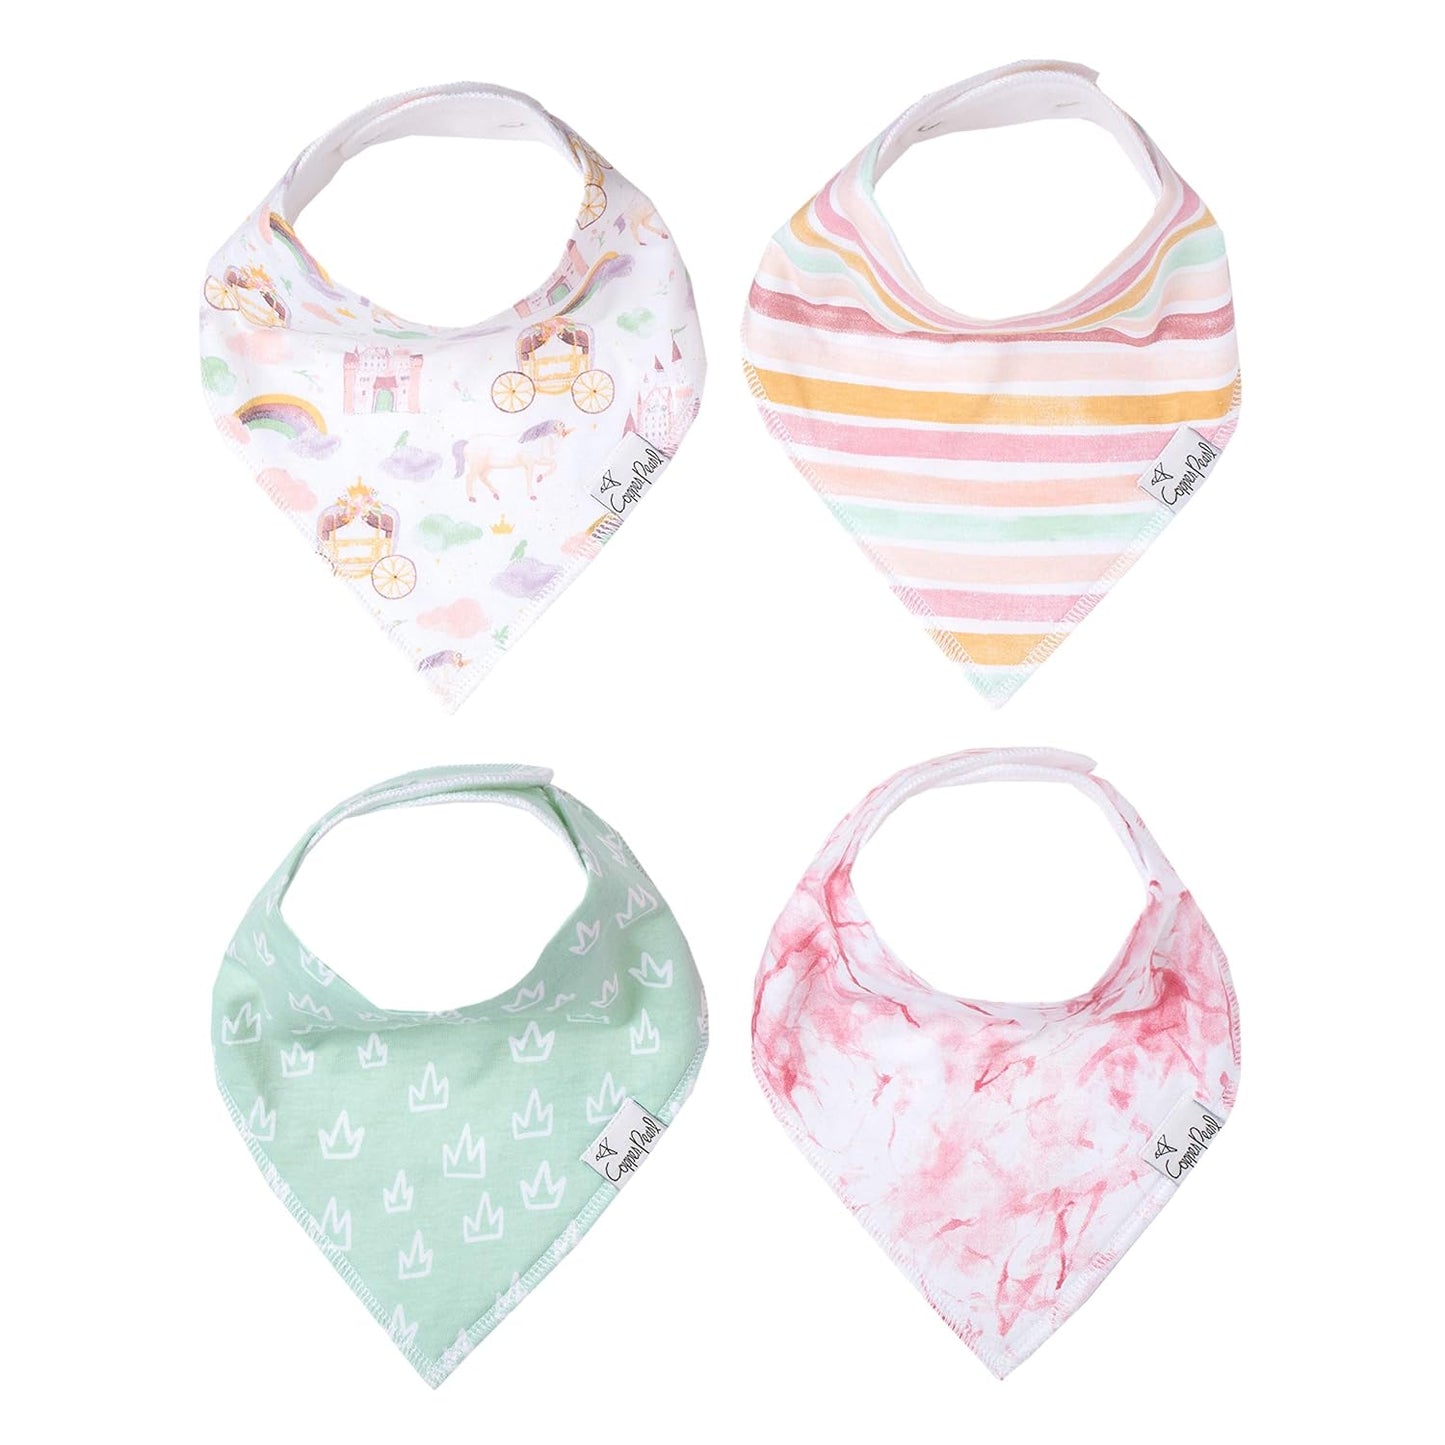 Copper Pearl Baby Bandana Drool Bibs for Drooling and Teething 4 Pack Gift Set Ace, Soft Set of Cloth Bandana Bibs for Any Baby Girl or Boy, Cute Registry Ideas for Baby Shower Gifts